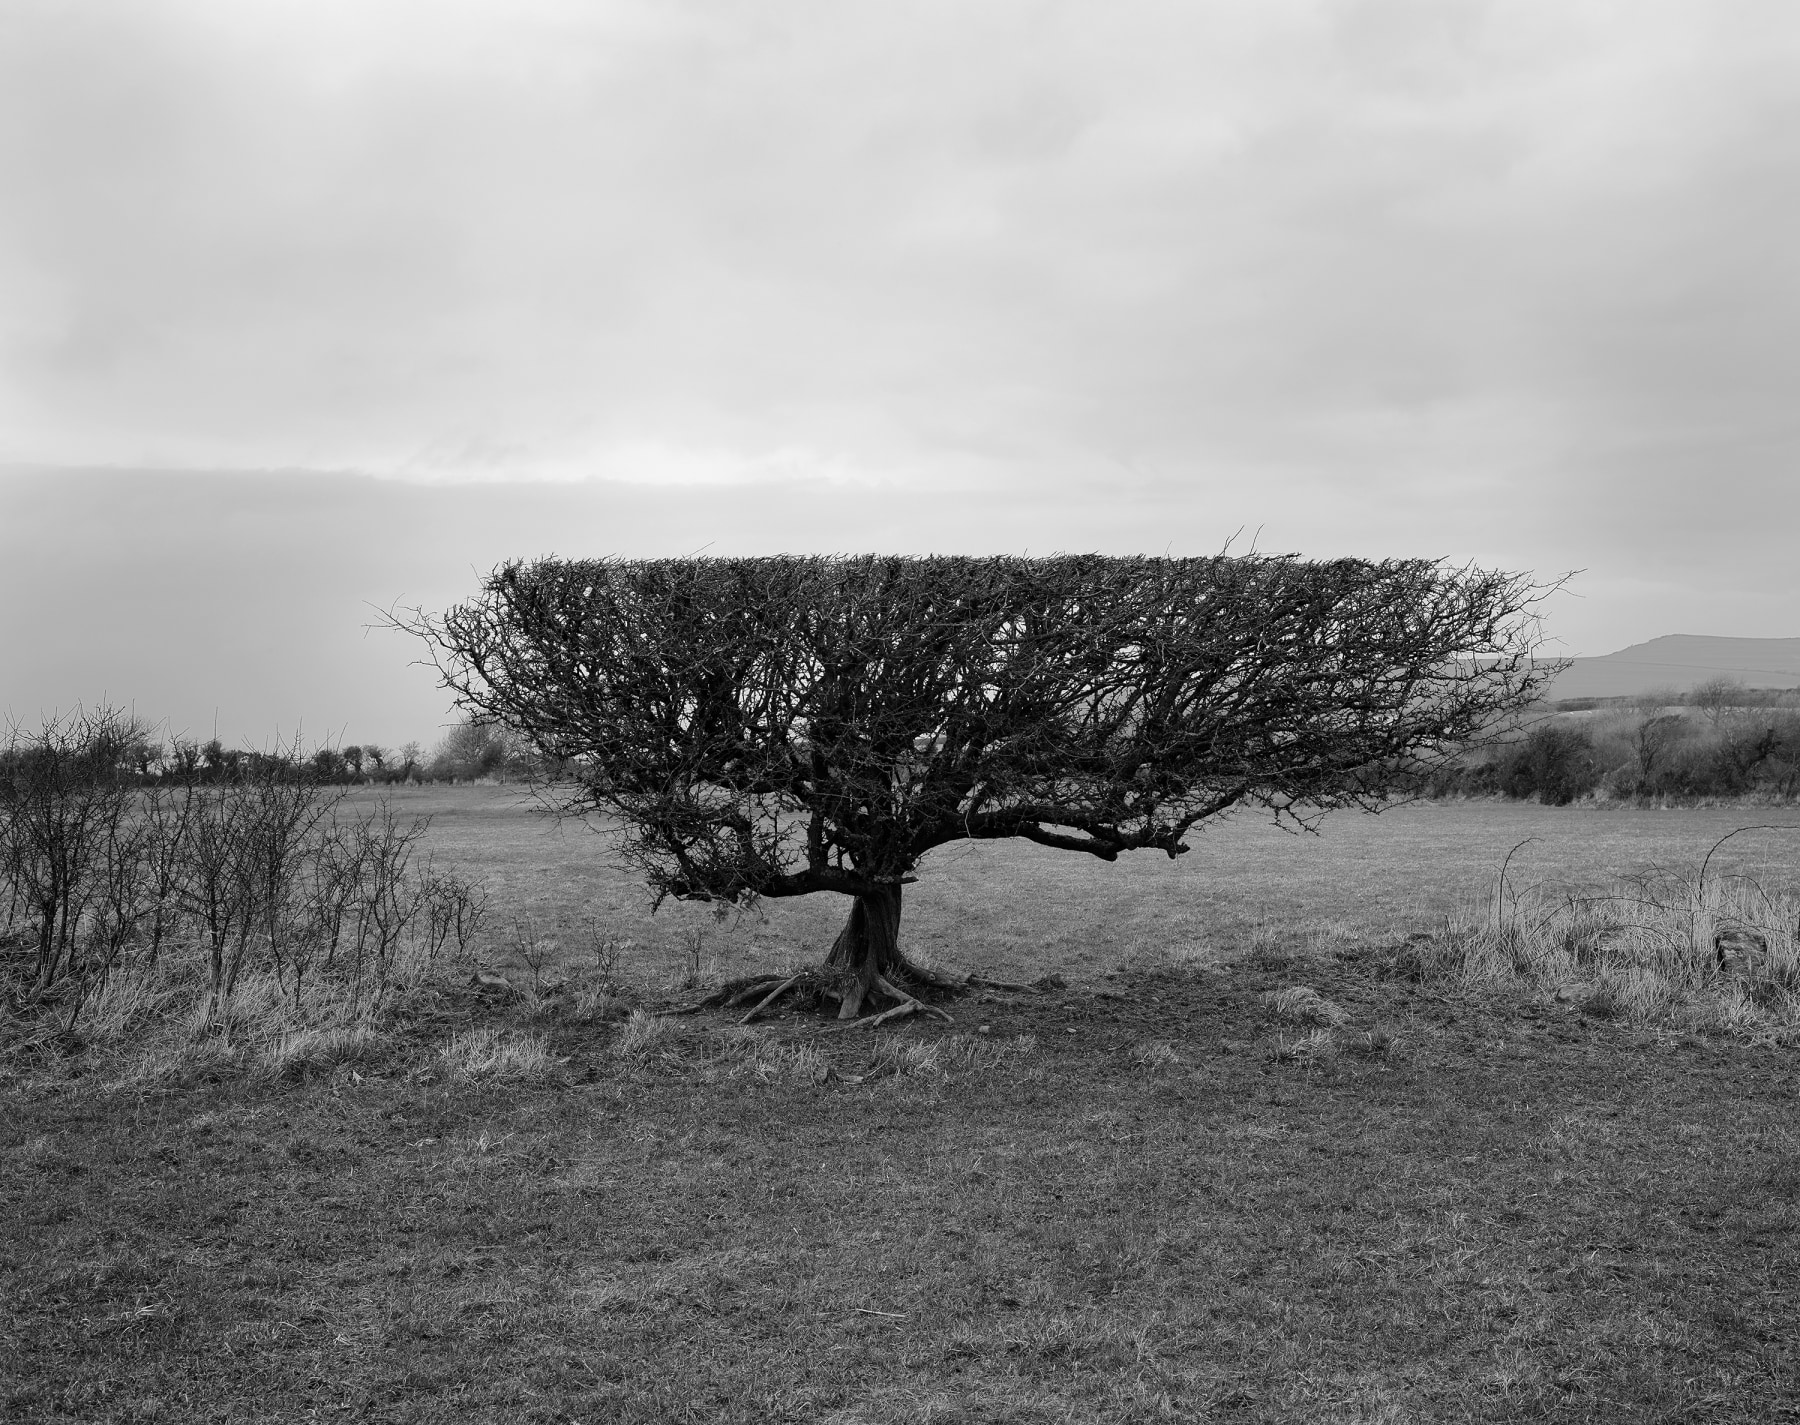 Flailed Hawthorn, Pembrokeshire, Wales,&nbsp;2020. Archival pigment print, 55 x 46 inches.&nbsp;